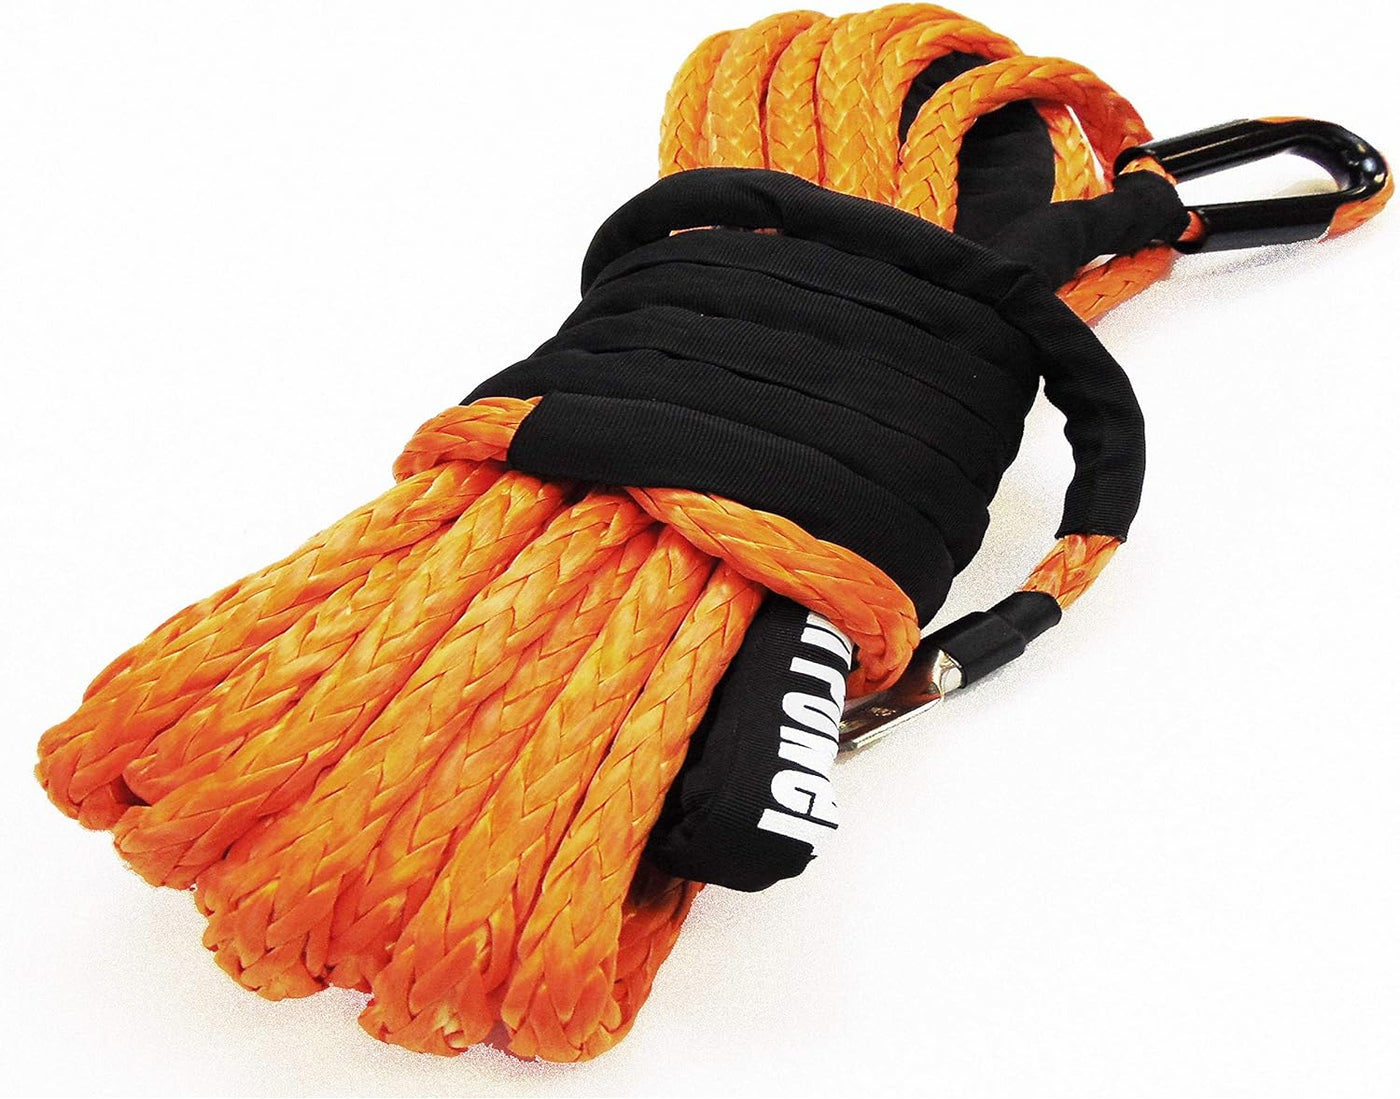 Jutemill 3/8" X 50 feet Synthetic Winch Rope, 3/8-50' Cable line Truck Towing, Trailer, Boat Anchor, Rigging Off Road Recovery-Rope (Orange Colored)